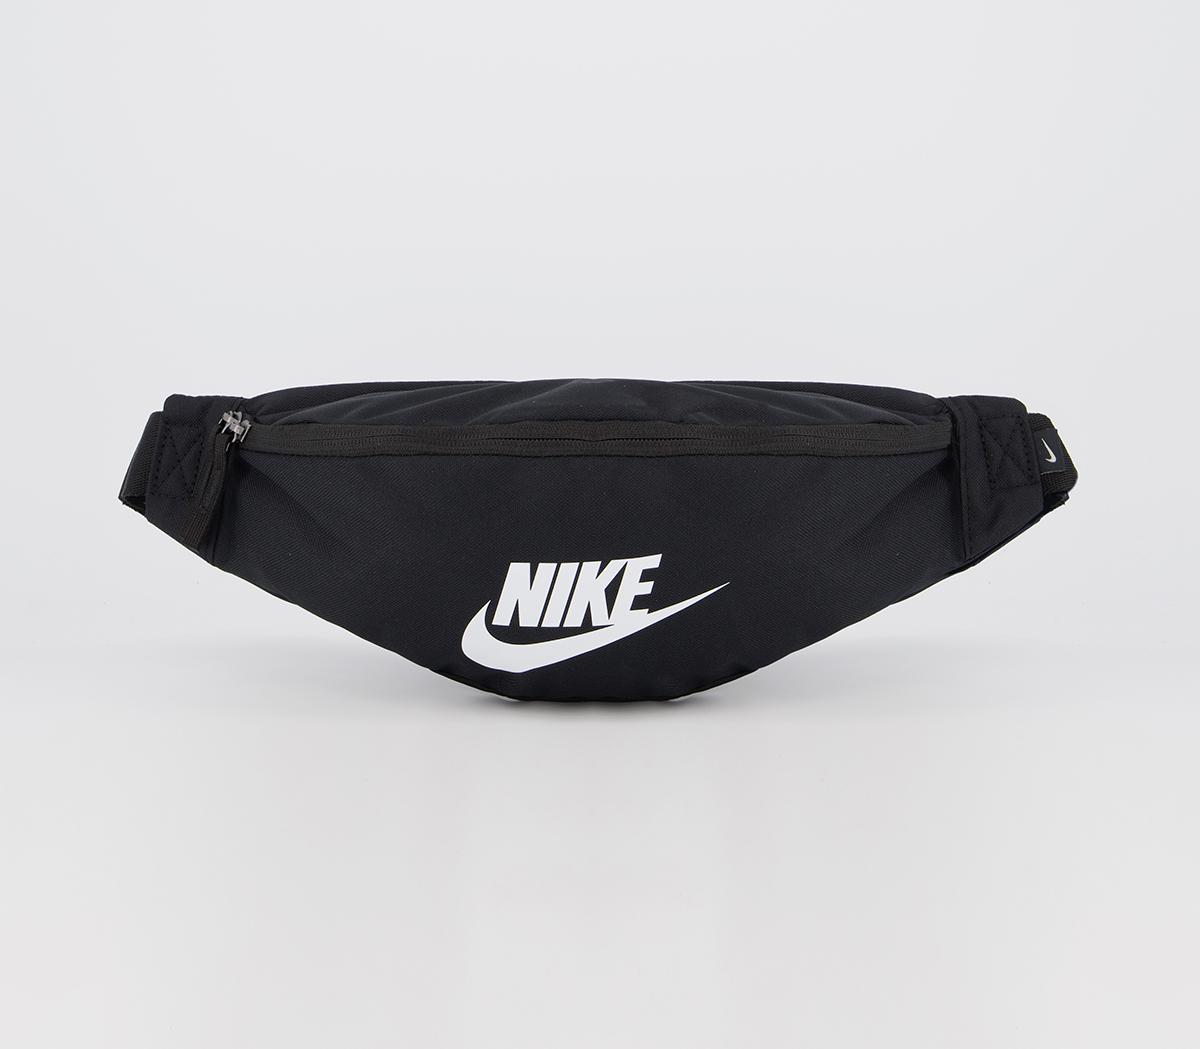 Nike Heritage Fanny Pack Black White - Accessories